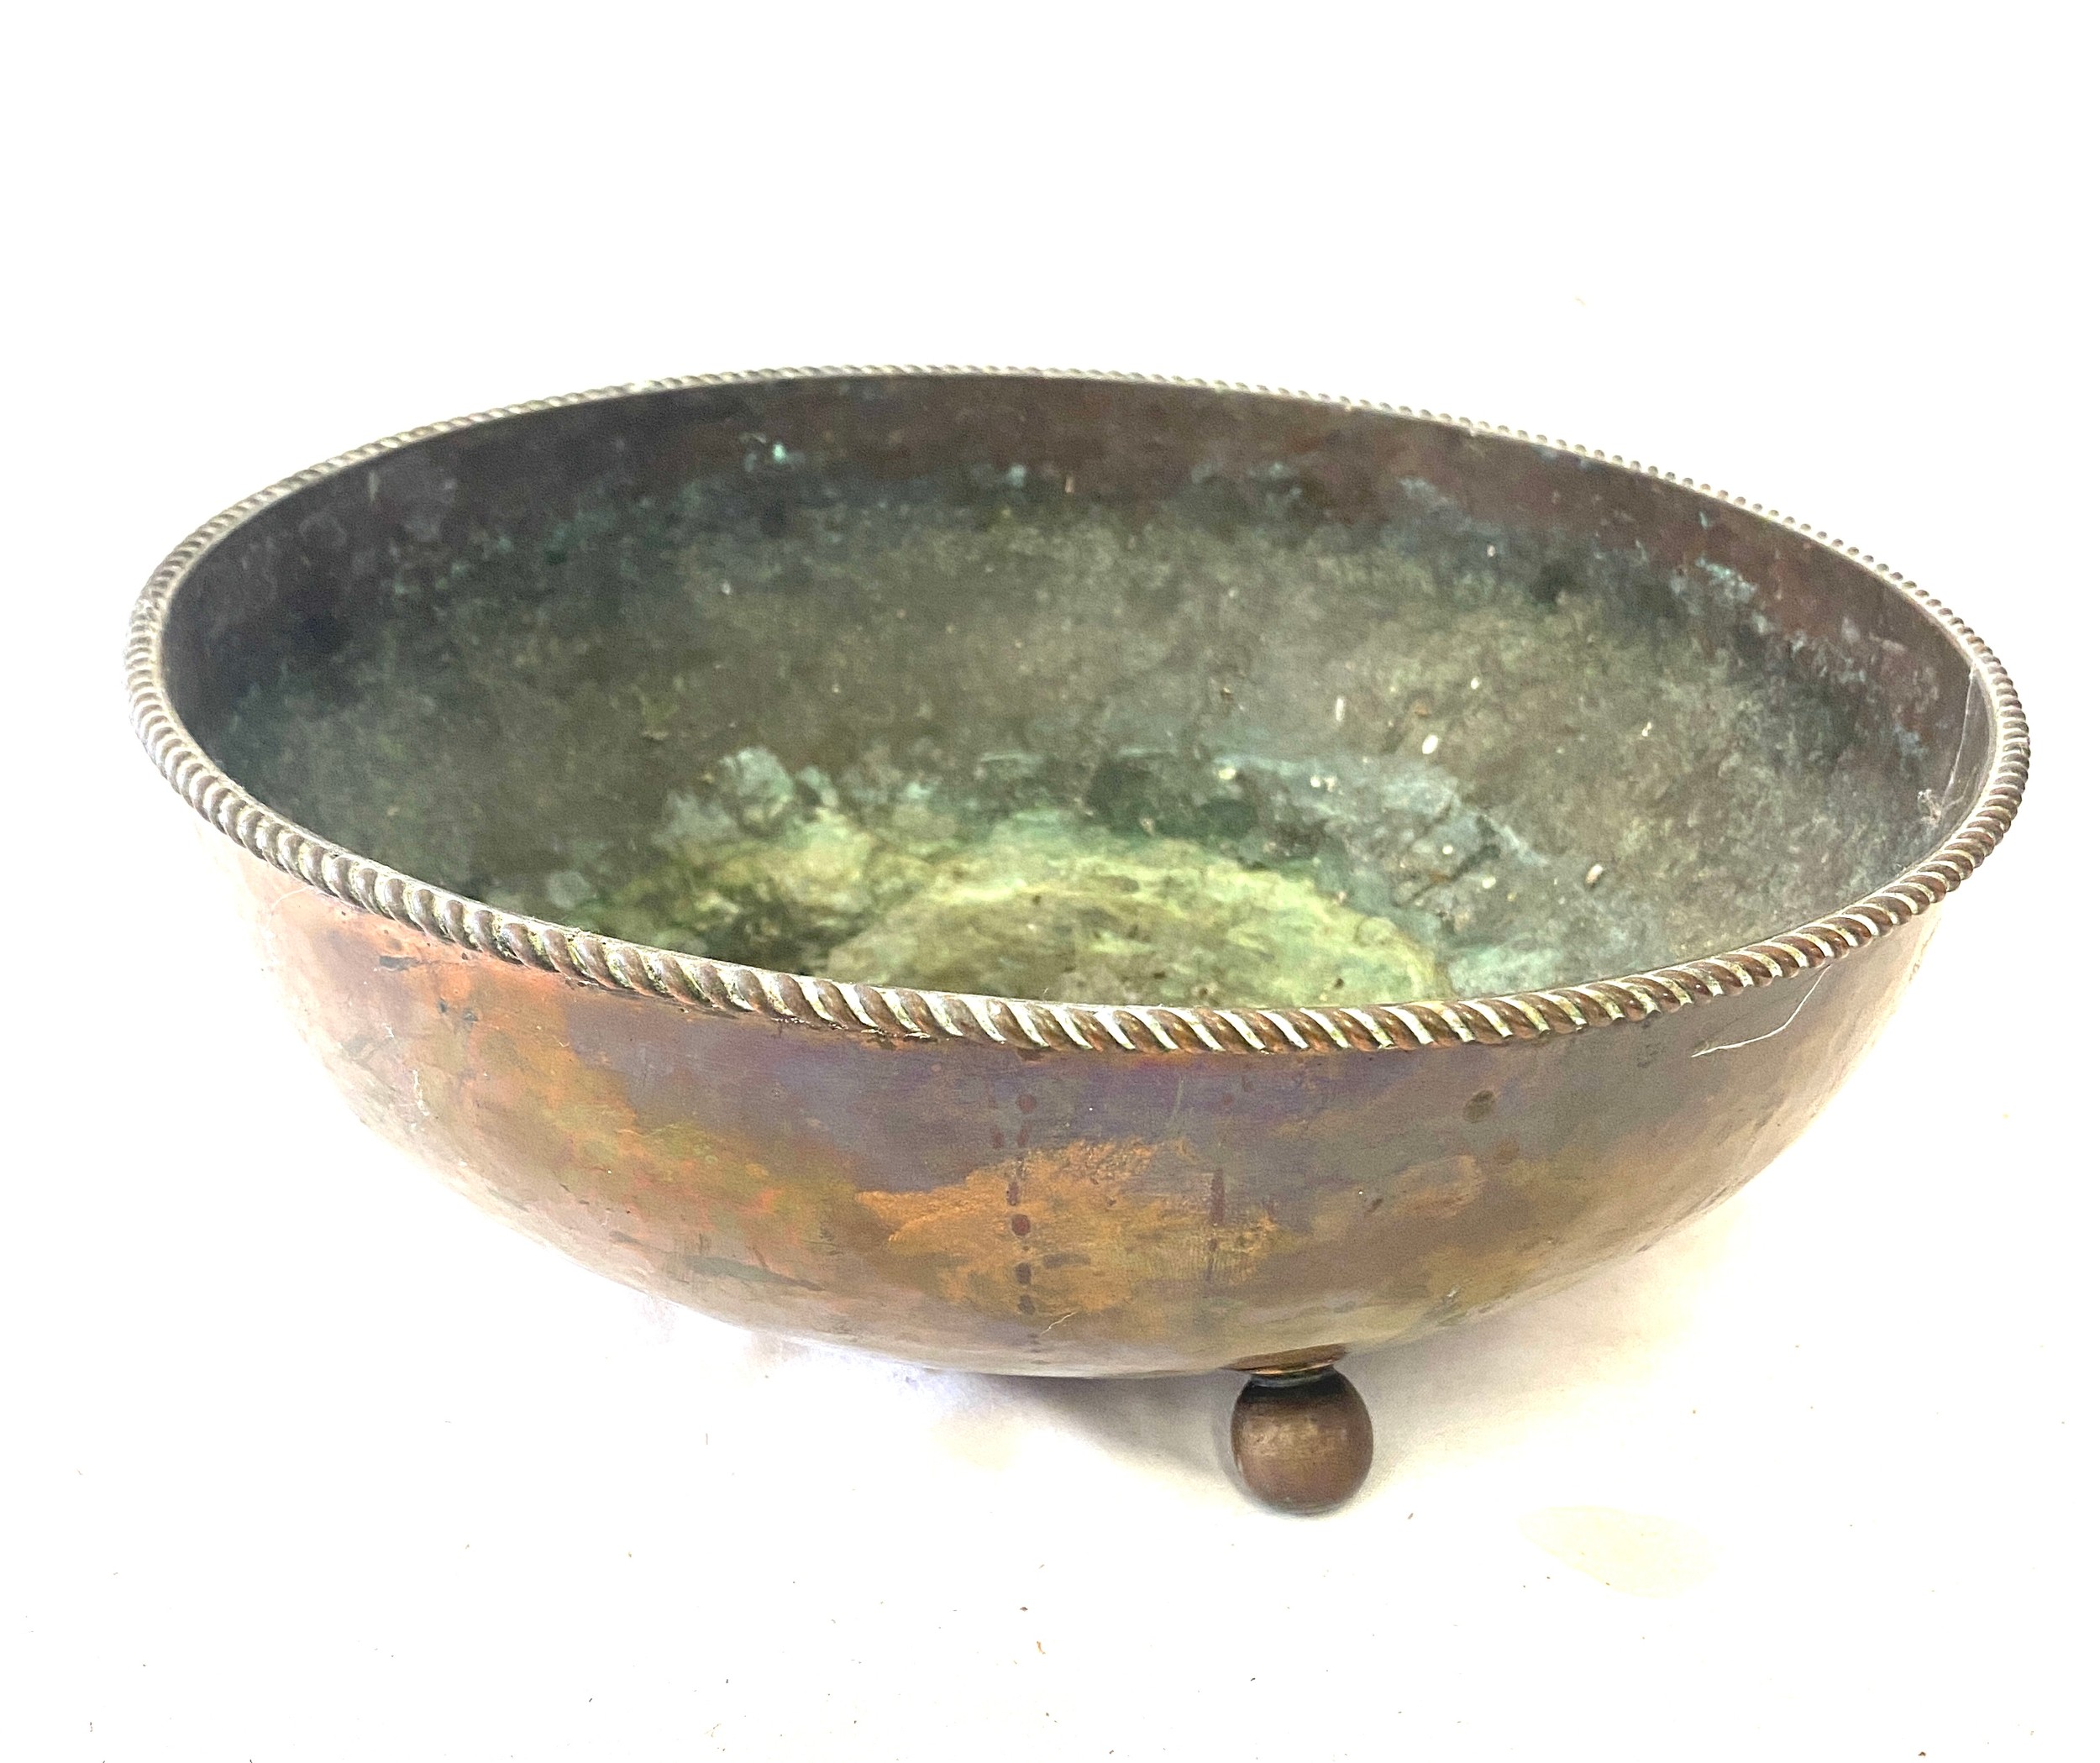 Vintage arts and crafts Drxan lester copper bowl diameter approx 11.5 inches - Image 4 of 6